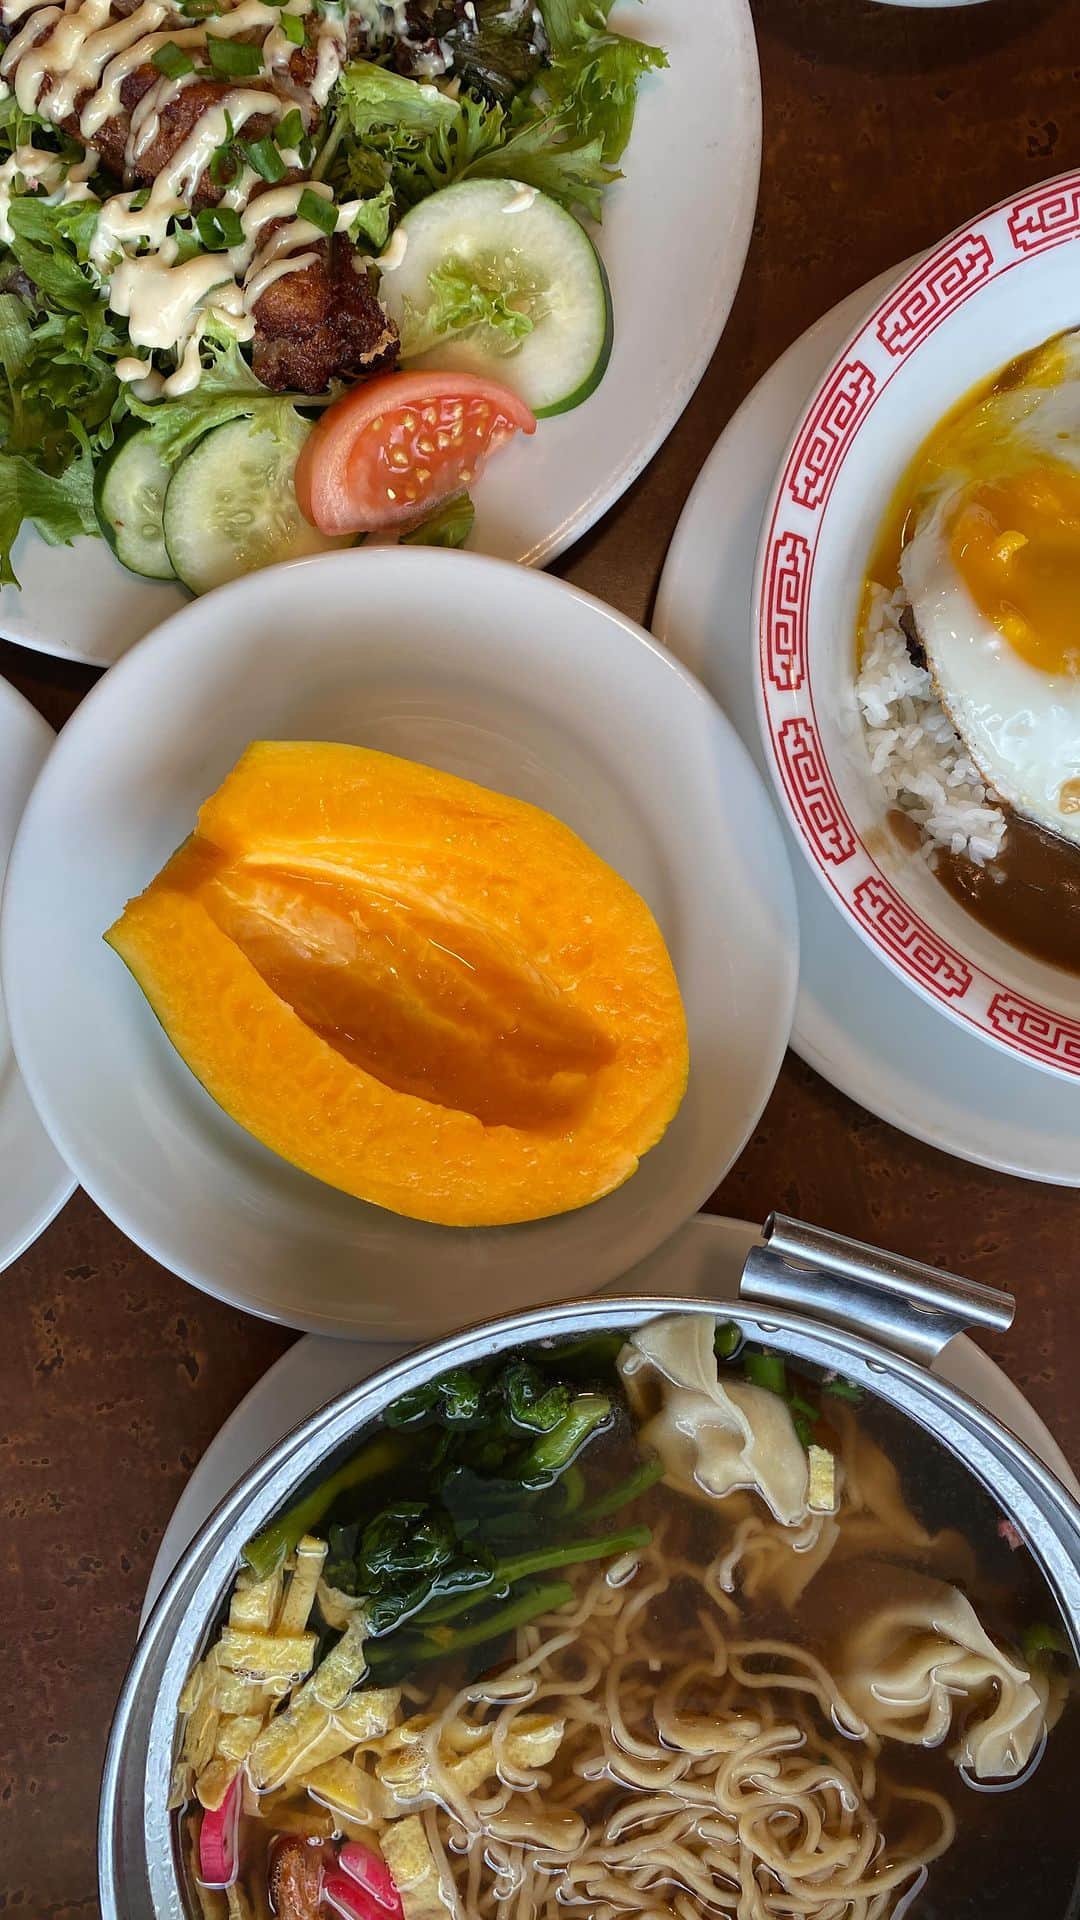 Zippy's Restaurantsのインスタグラム：「Did you know when eating at Zippy’s you’re not only supporting a locally owned business, but you’re also supporting local farmers and growers too! April is “All About Local” and we are showcasing some of the local ingredients in your everyday meals!  Saimin from Sun Noodle Sugarland Growers provides the tomatoes and Zippy’s often buys local cucumber, green onion, papaya and eggplant when available.  The beef in your Zippy’s chili is also 100% local!  And of course the eggs are from Eggs Hawaii too!  Did you know that?」